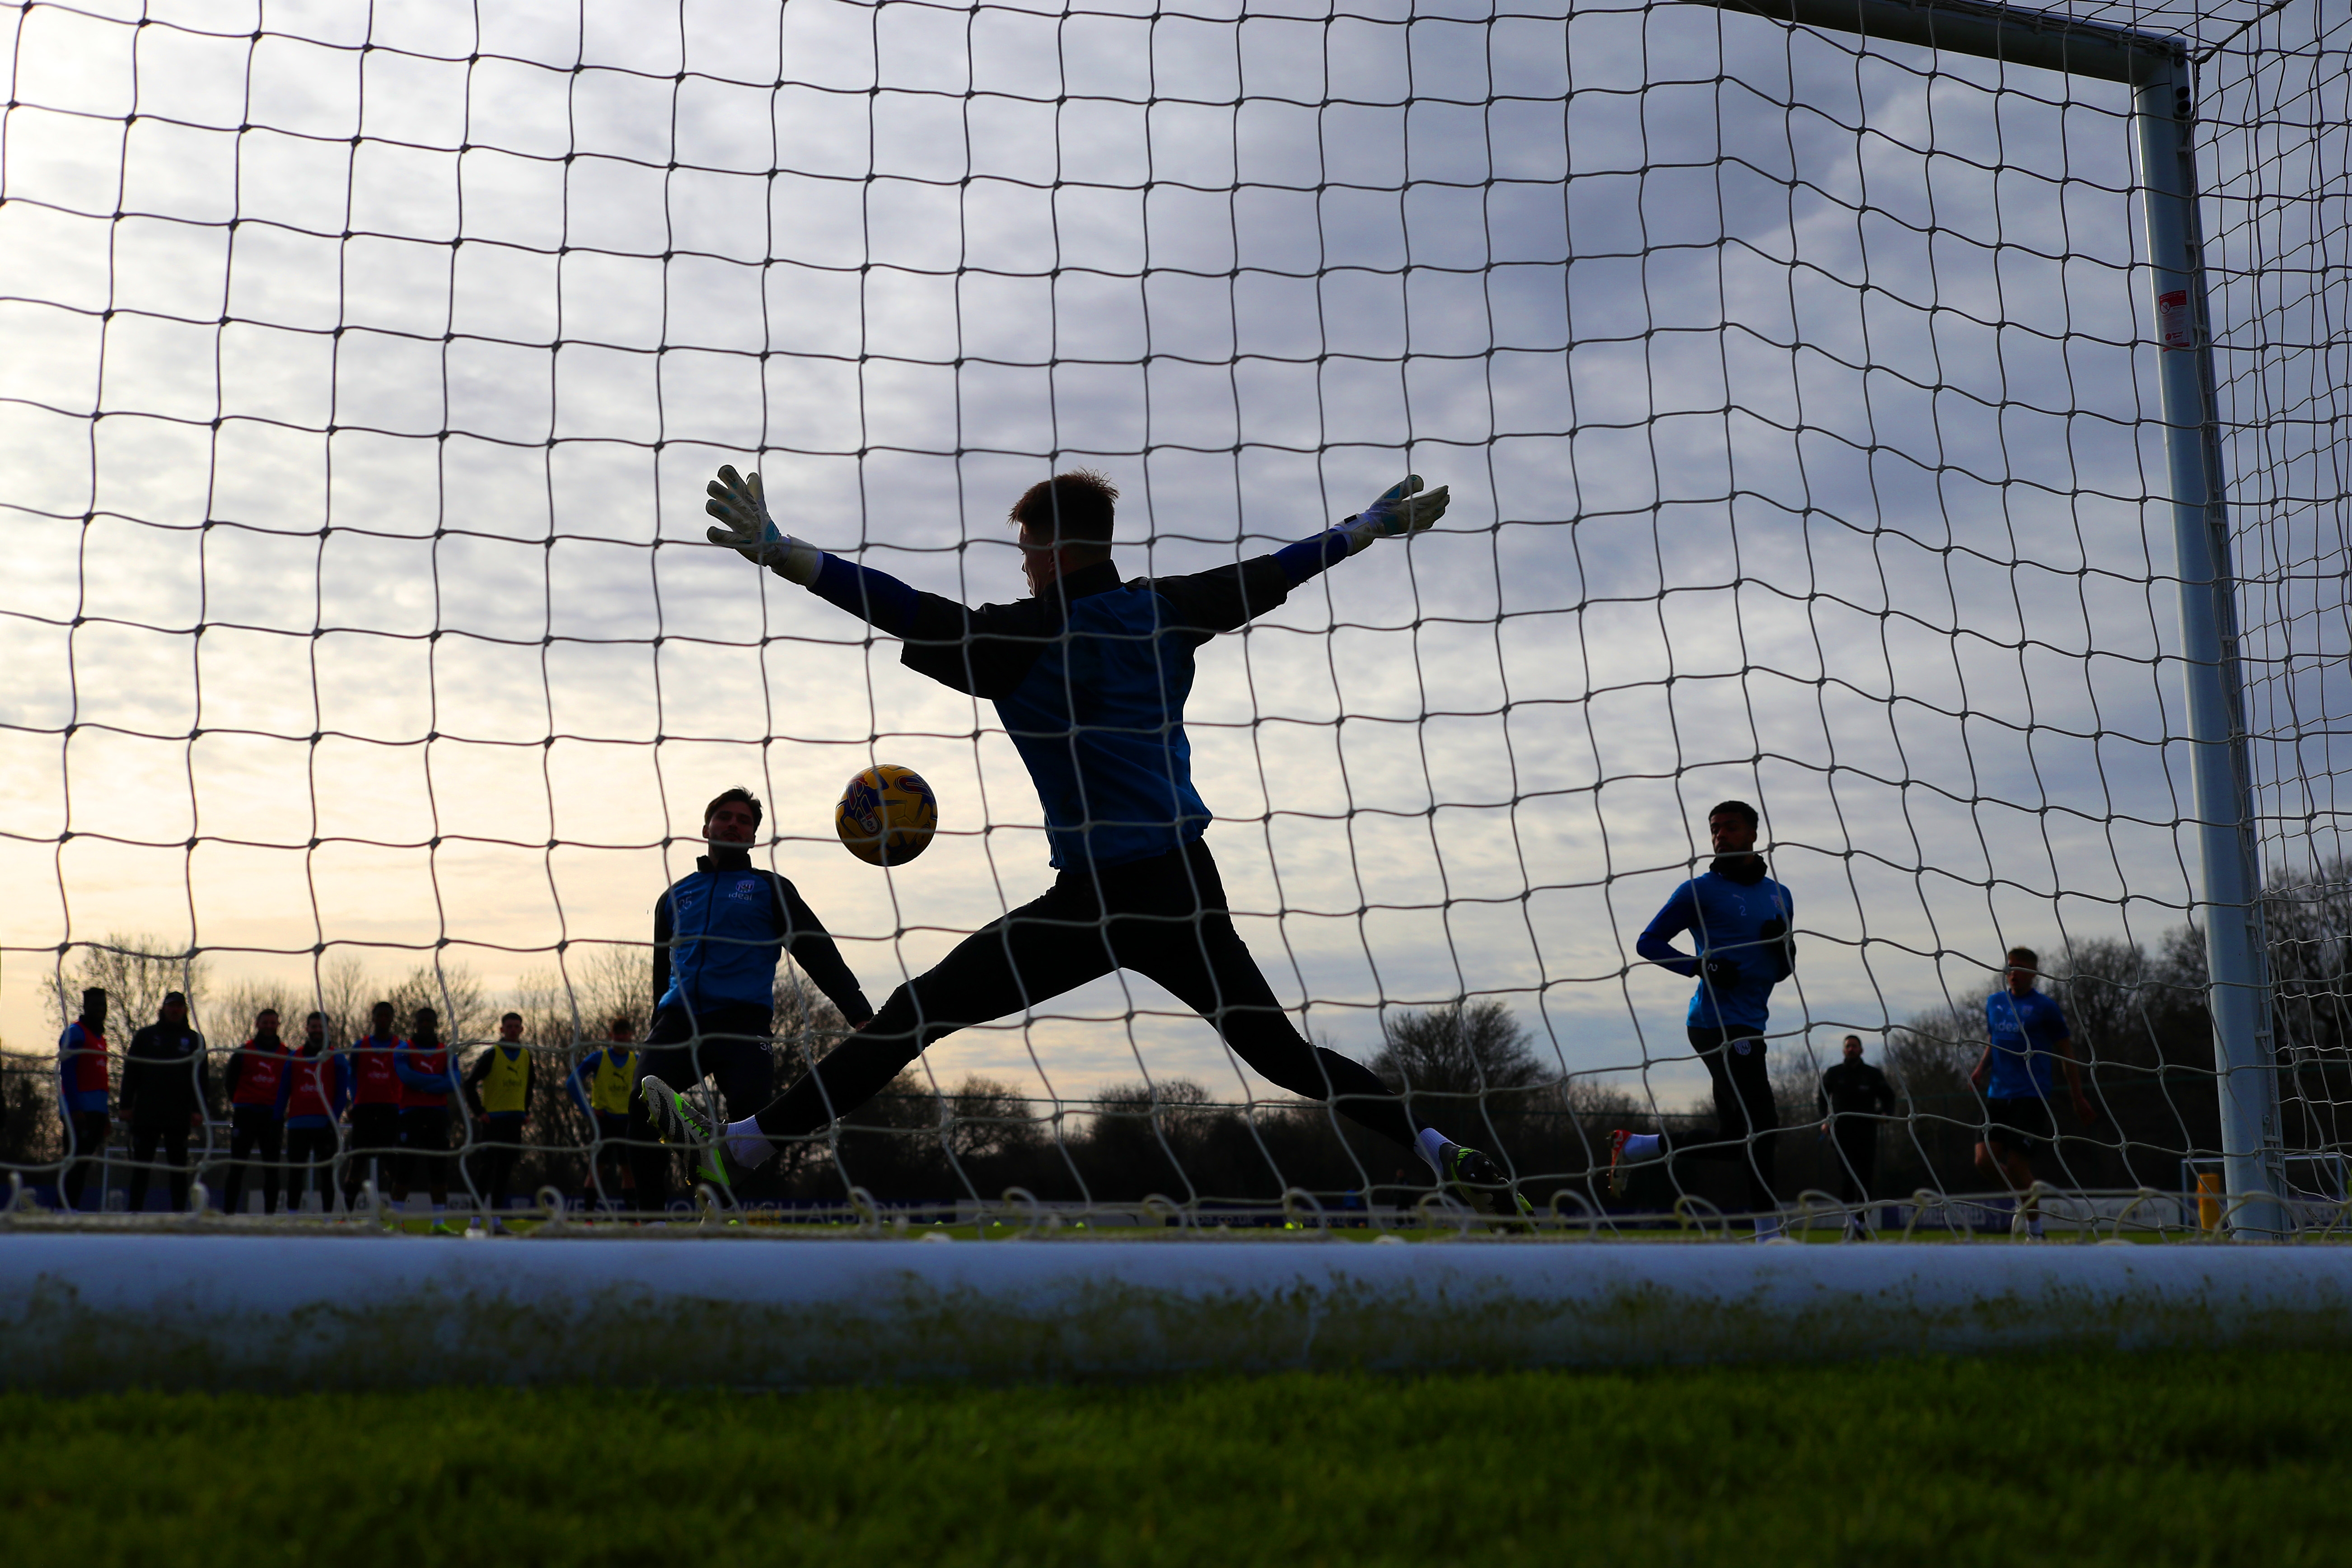 a view from behind a goal net during a training session